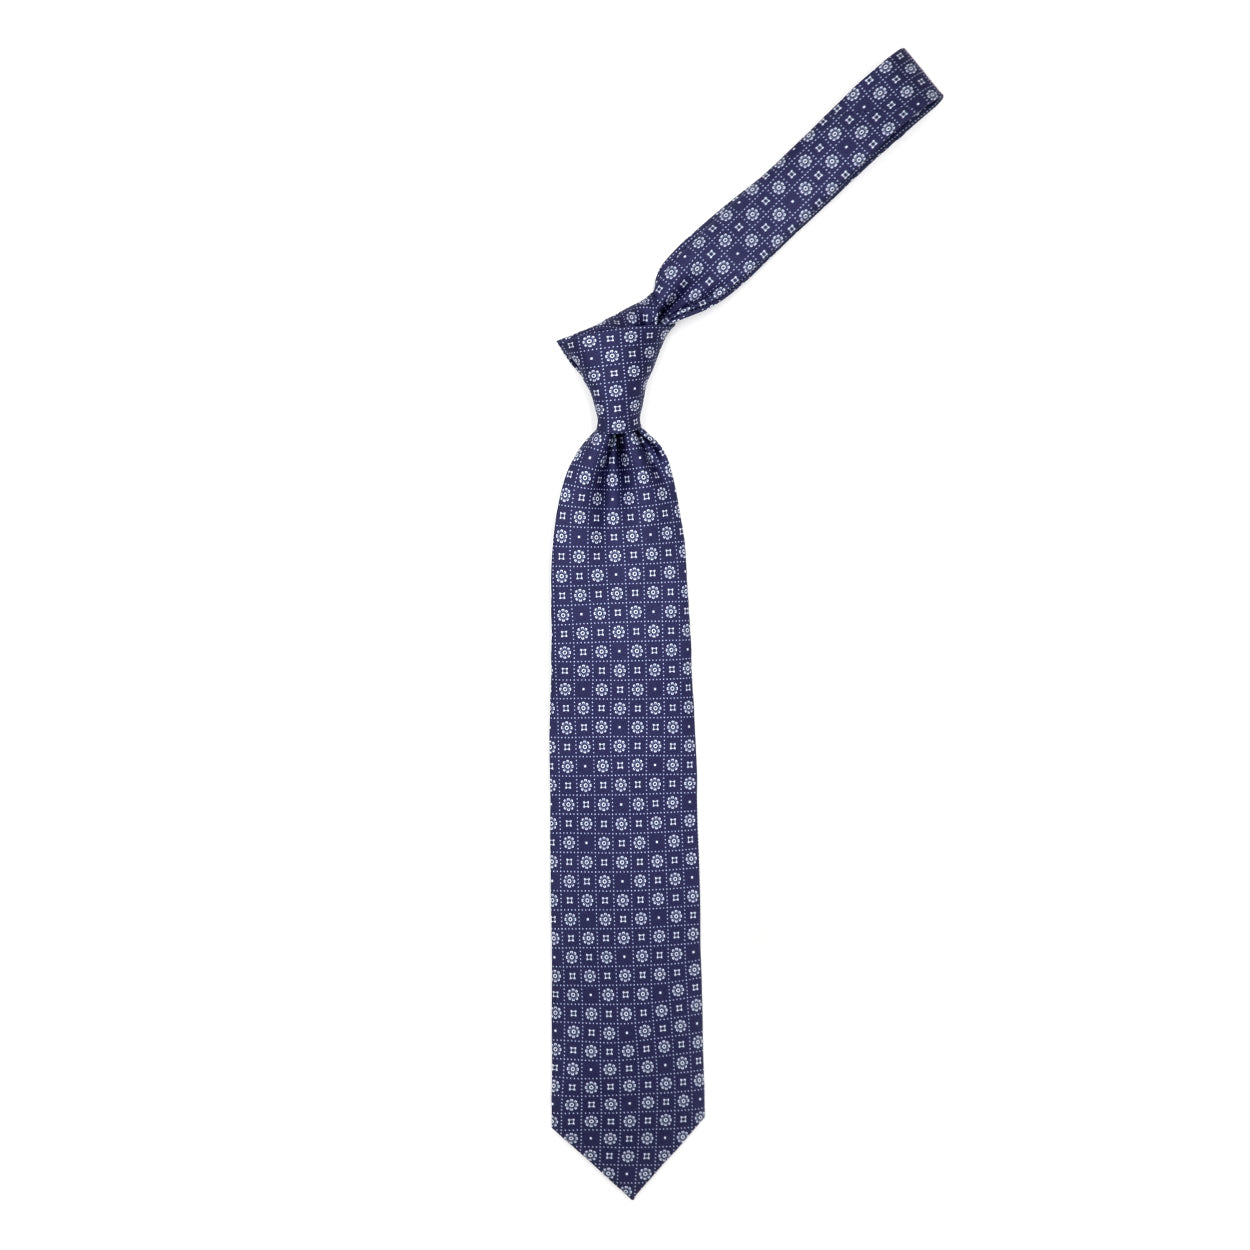 Blue tie with little flowers, squares and white dots